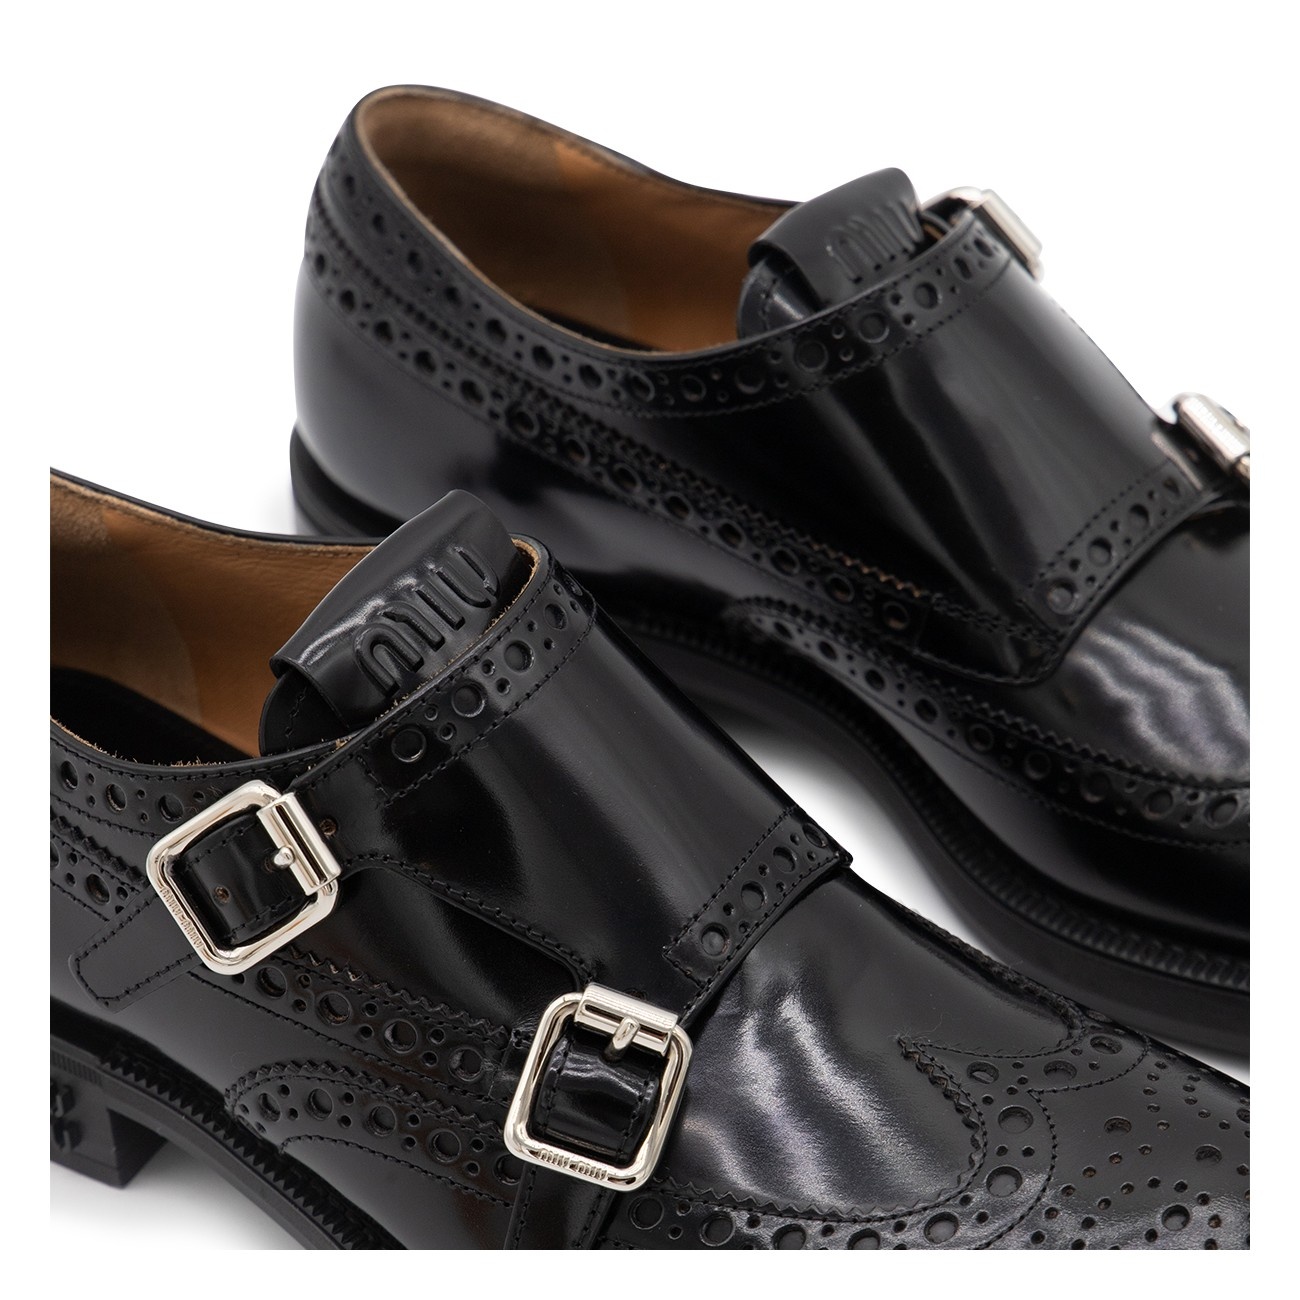 black leather formal shoes - 4